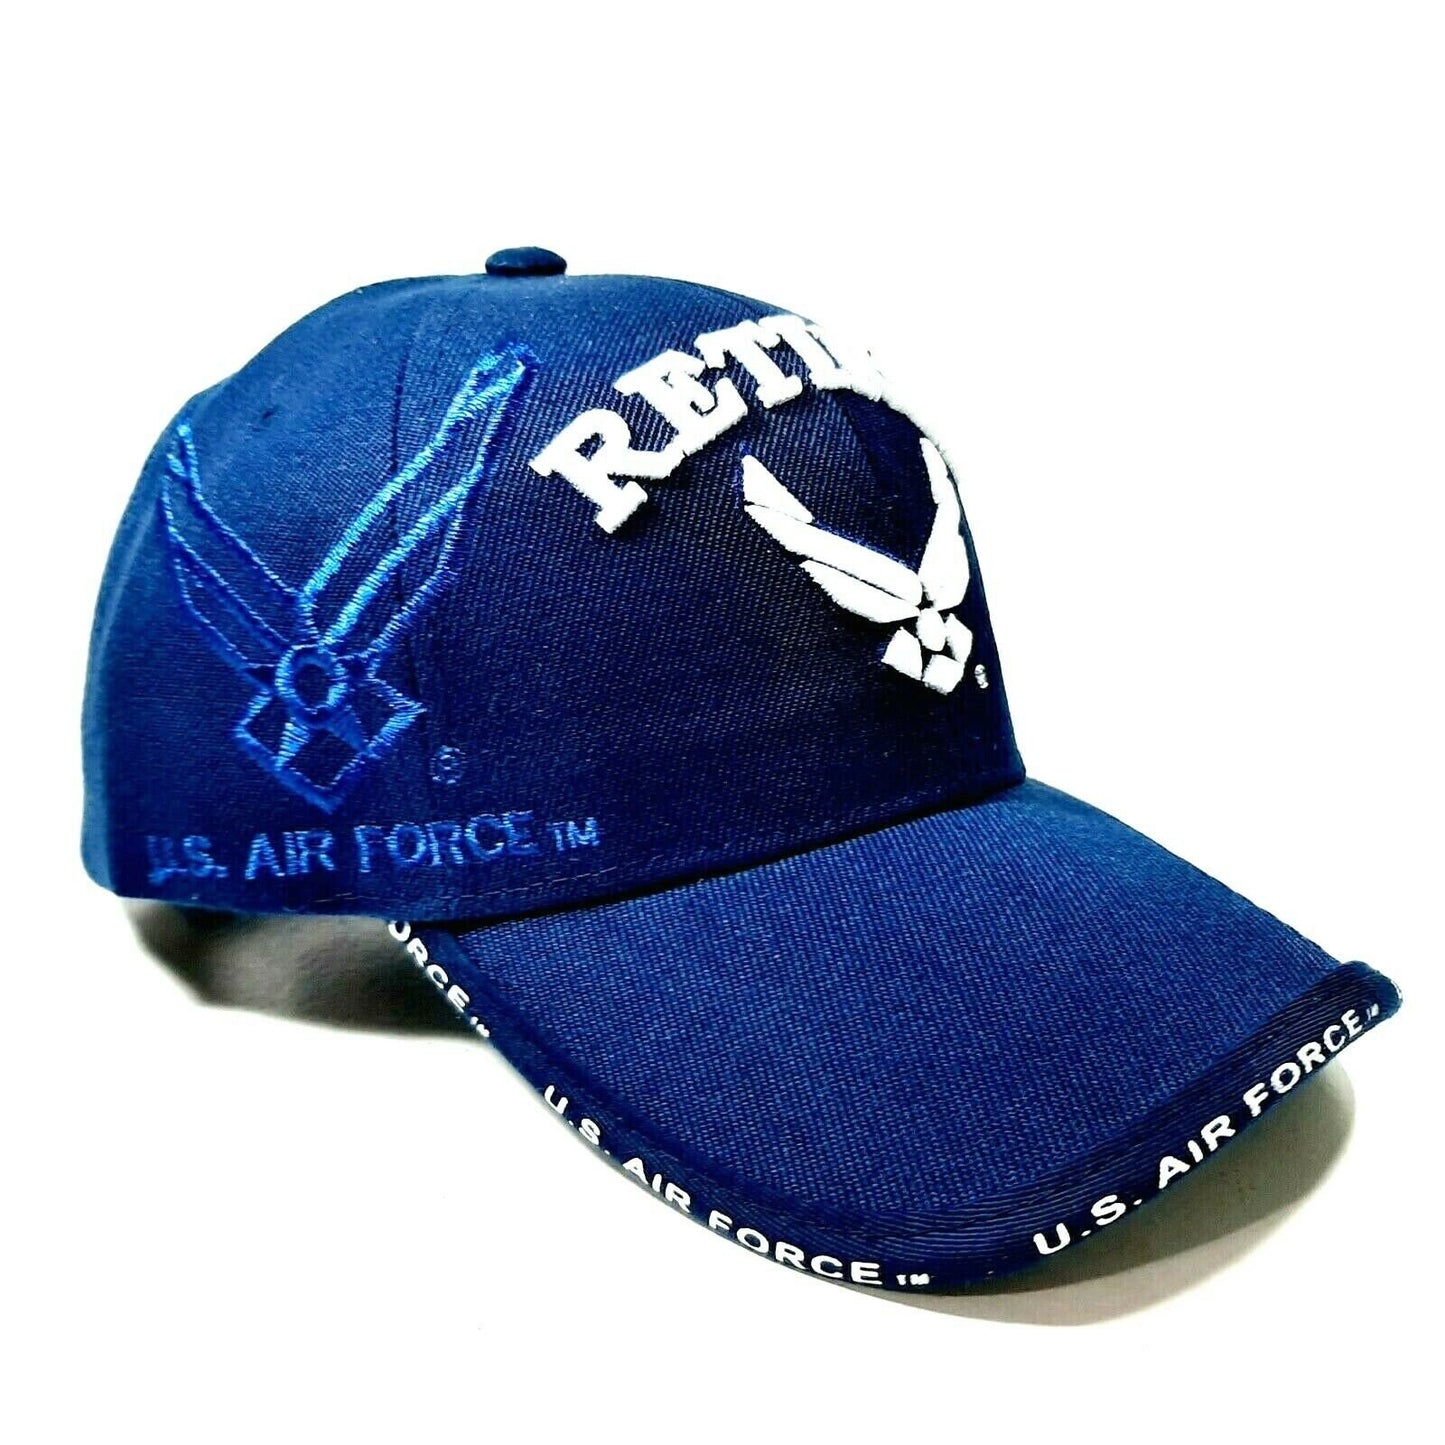 US Air Force Retired Men's Ball Cap Hat Navy Blue Acrylic Embroidered